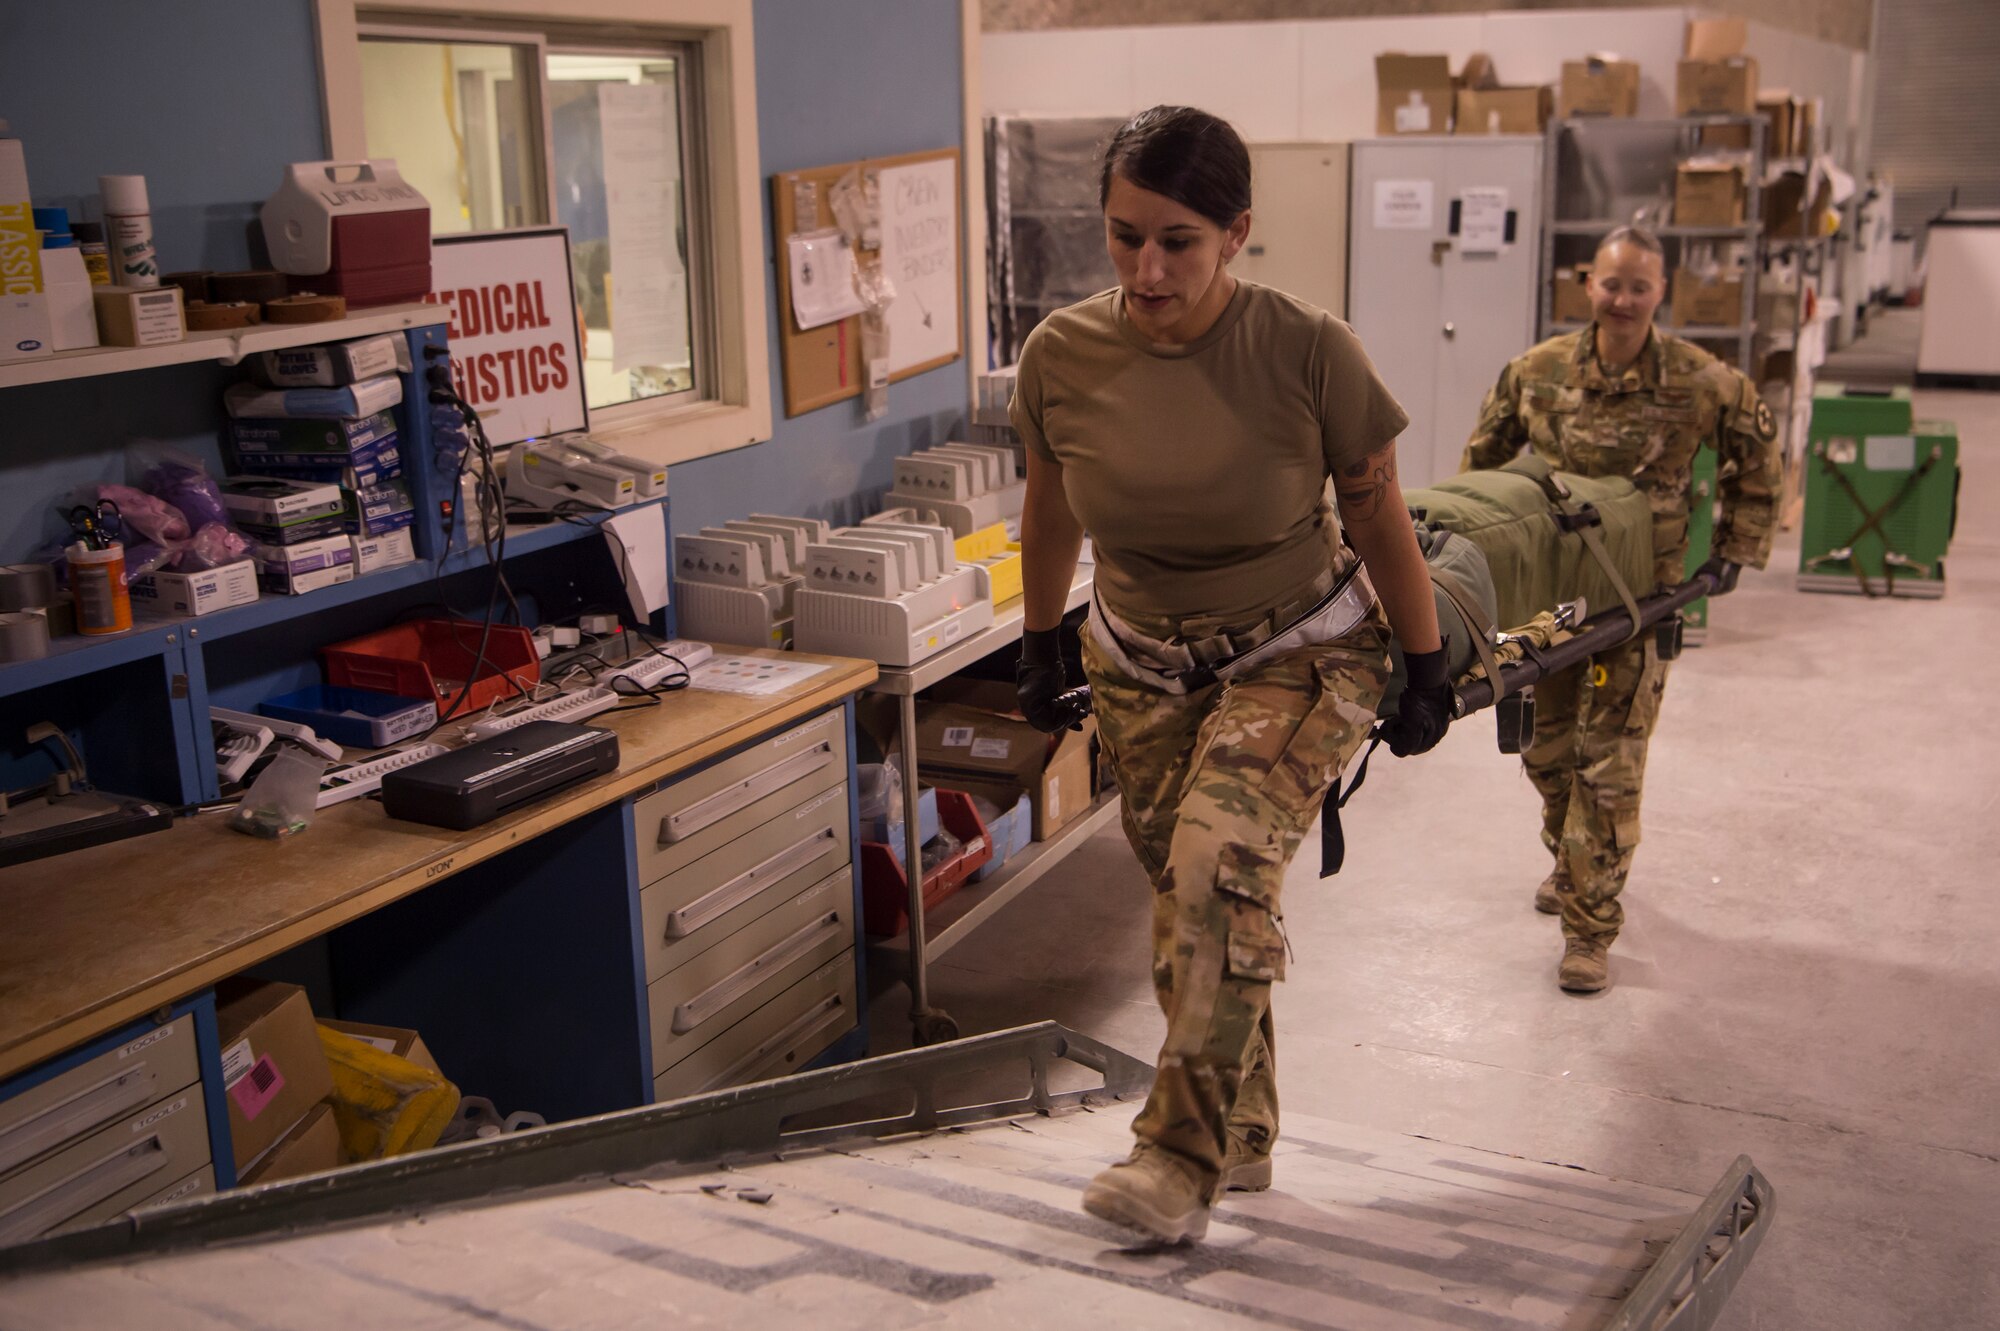 Staff Sgt. Monica Otholt, left, 379th Expeditionary Aeromedical Evacuation Squadron (EAES) duty controller, and Staff Sgt. Lyndsey Glotfelty, 379th EAES aeromedical evacuation technician, move medical equipment onto the back of a truck at Al Udeid Air Base, Qatar, before a recent mission.